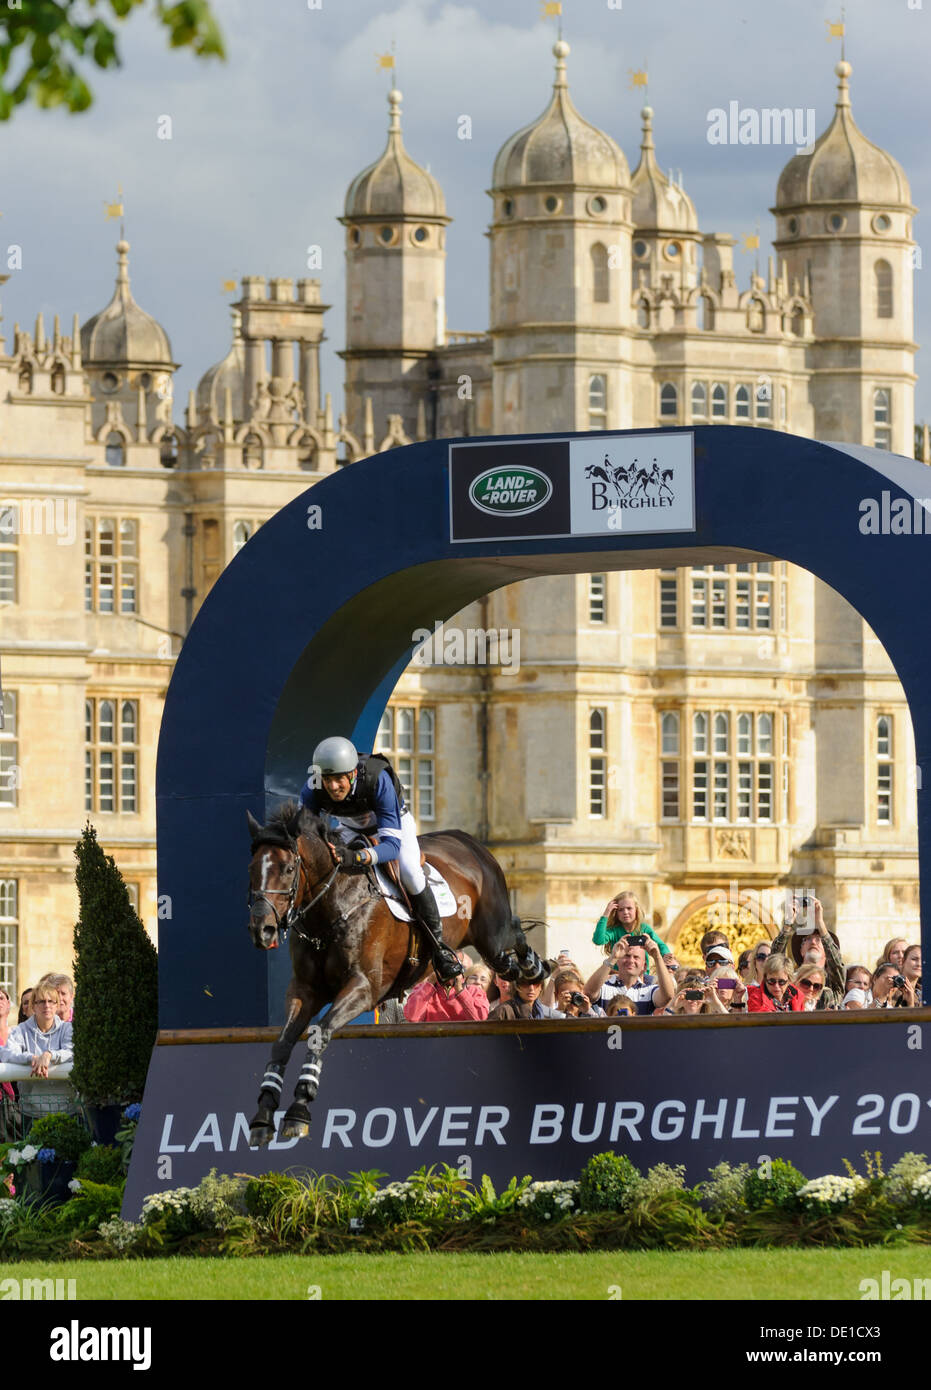 Jonathan Paget and CLIFTON LUSH jump the Olympic final fence during their cross country round, Burghley Horse Trials 2013. Stock Photo